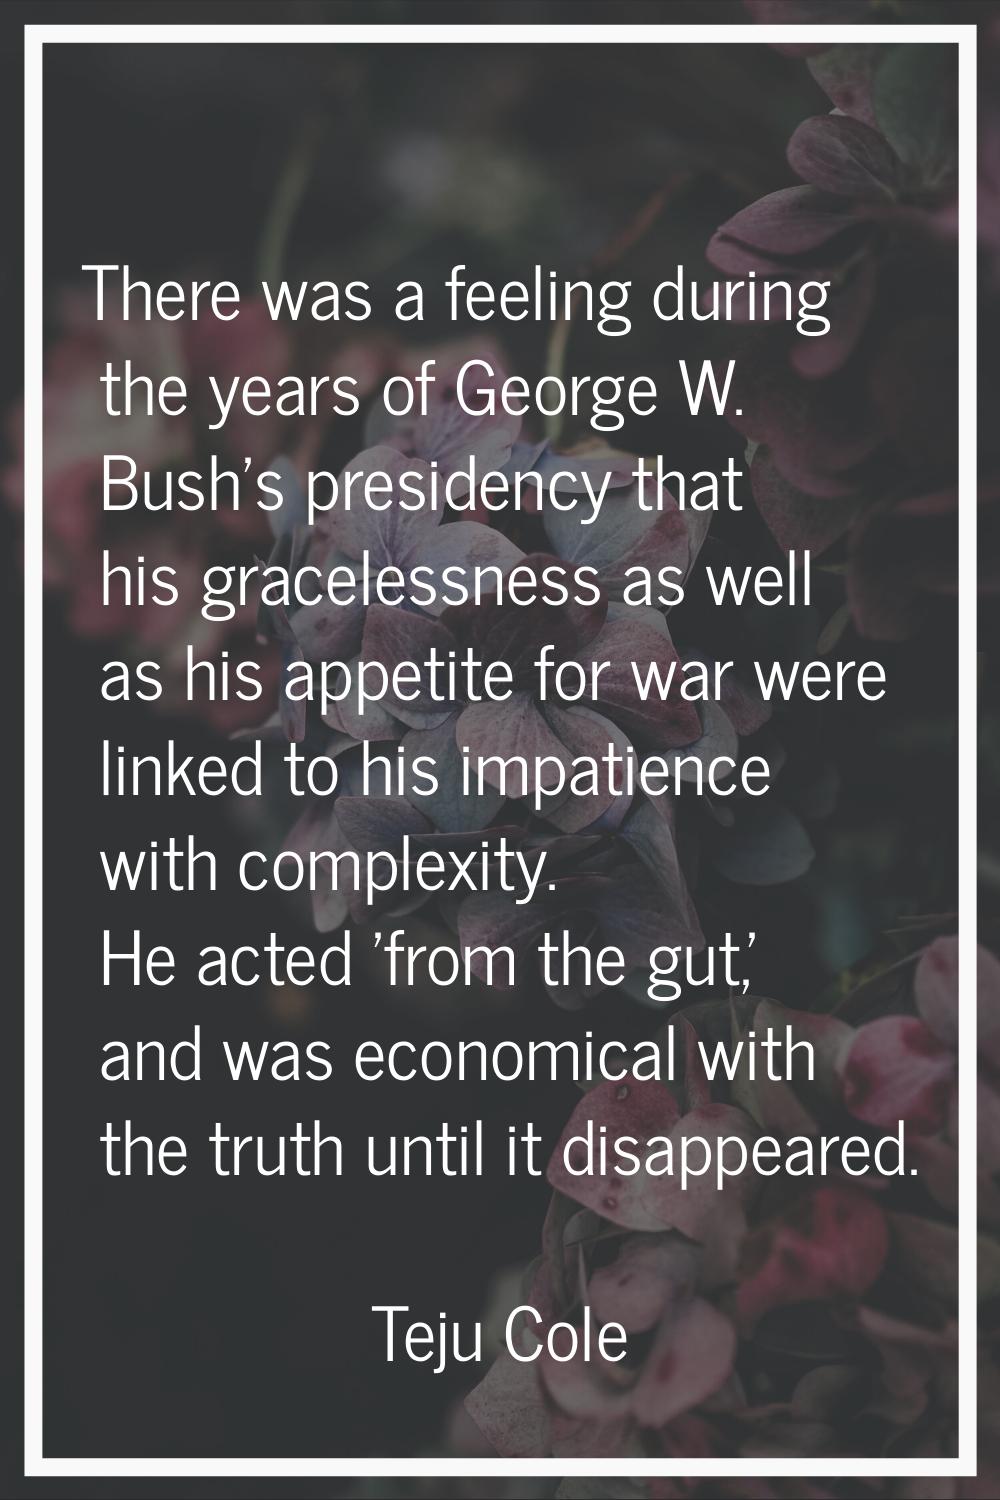 There was a feeling during the years of George W. Bush's presidency that his gracelessness as well 